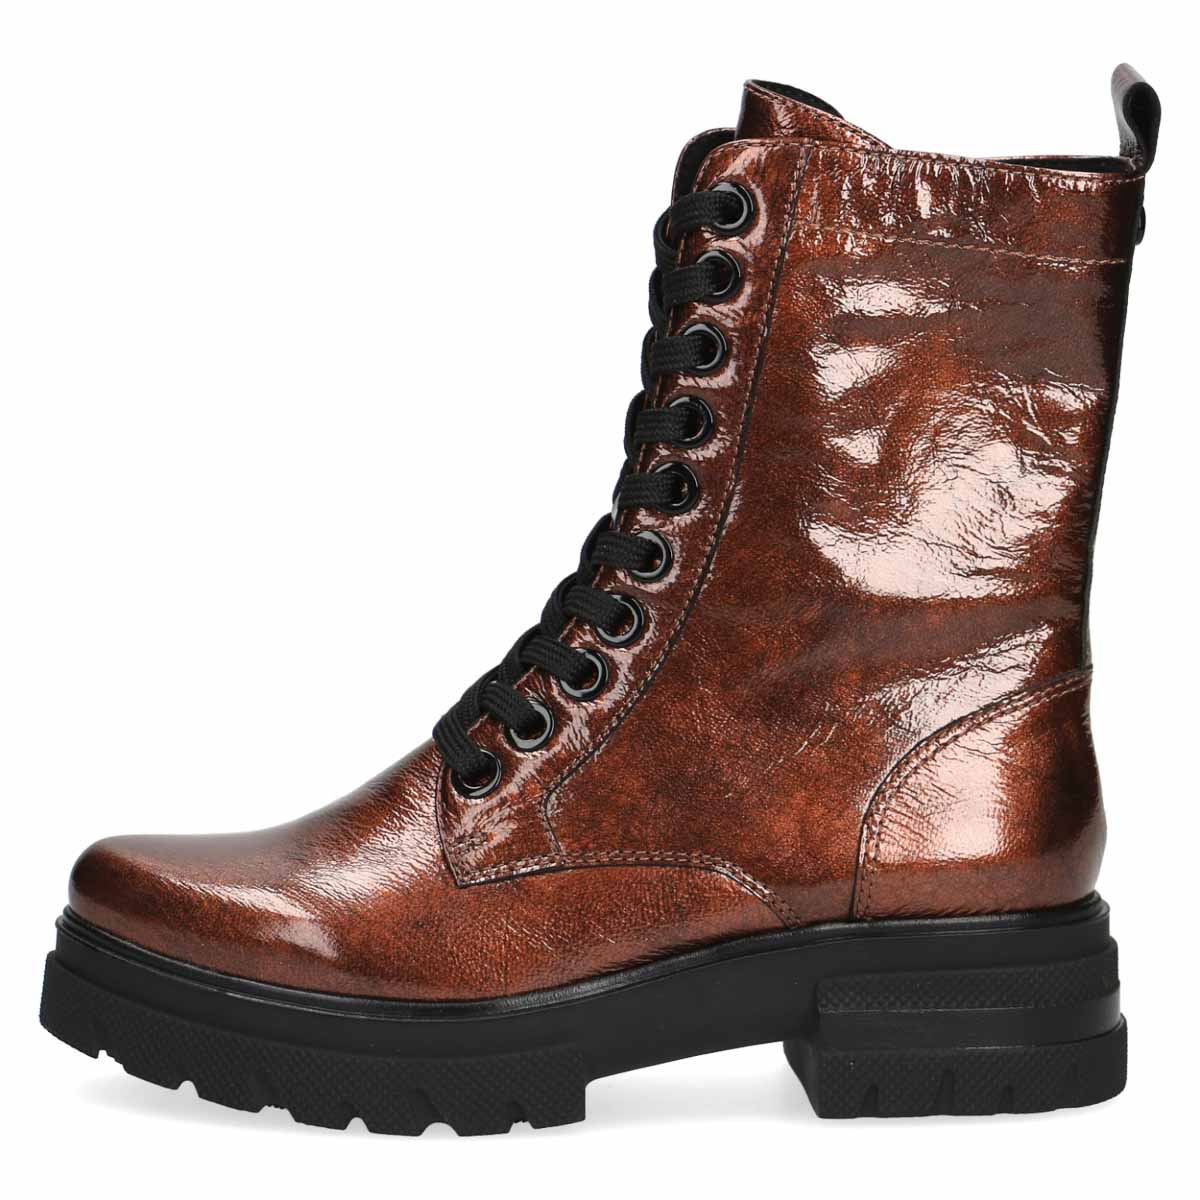 Frontal image showcasing the Caprice Lace-Up Combat Boots.